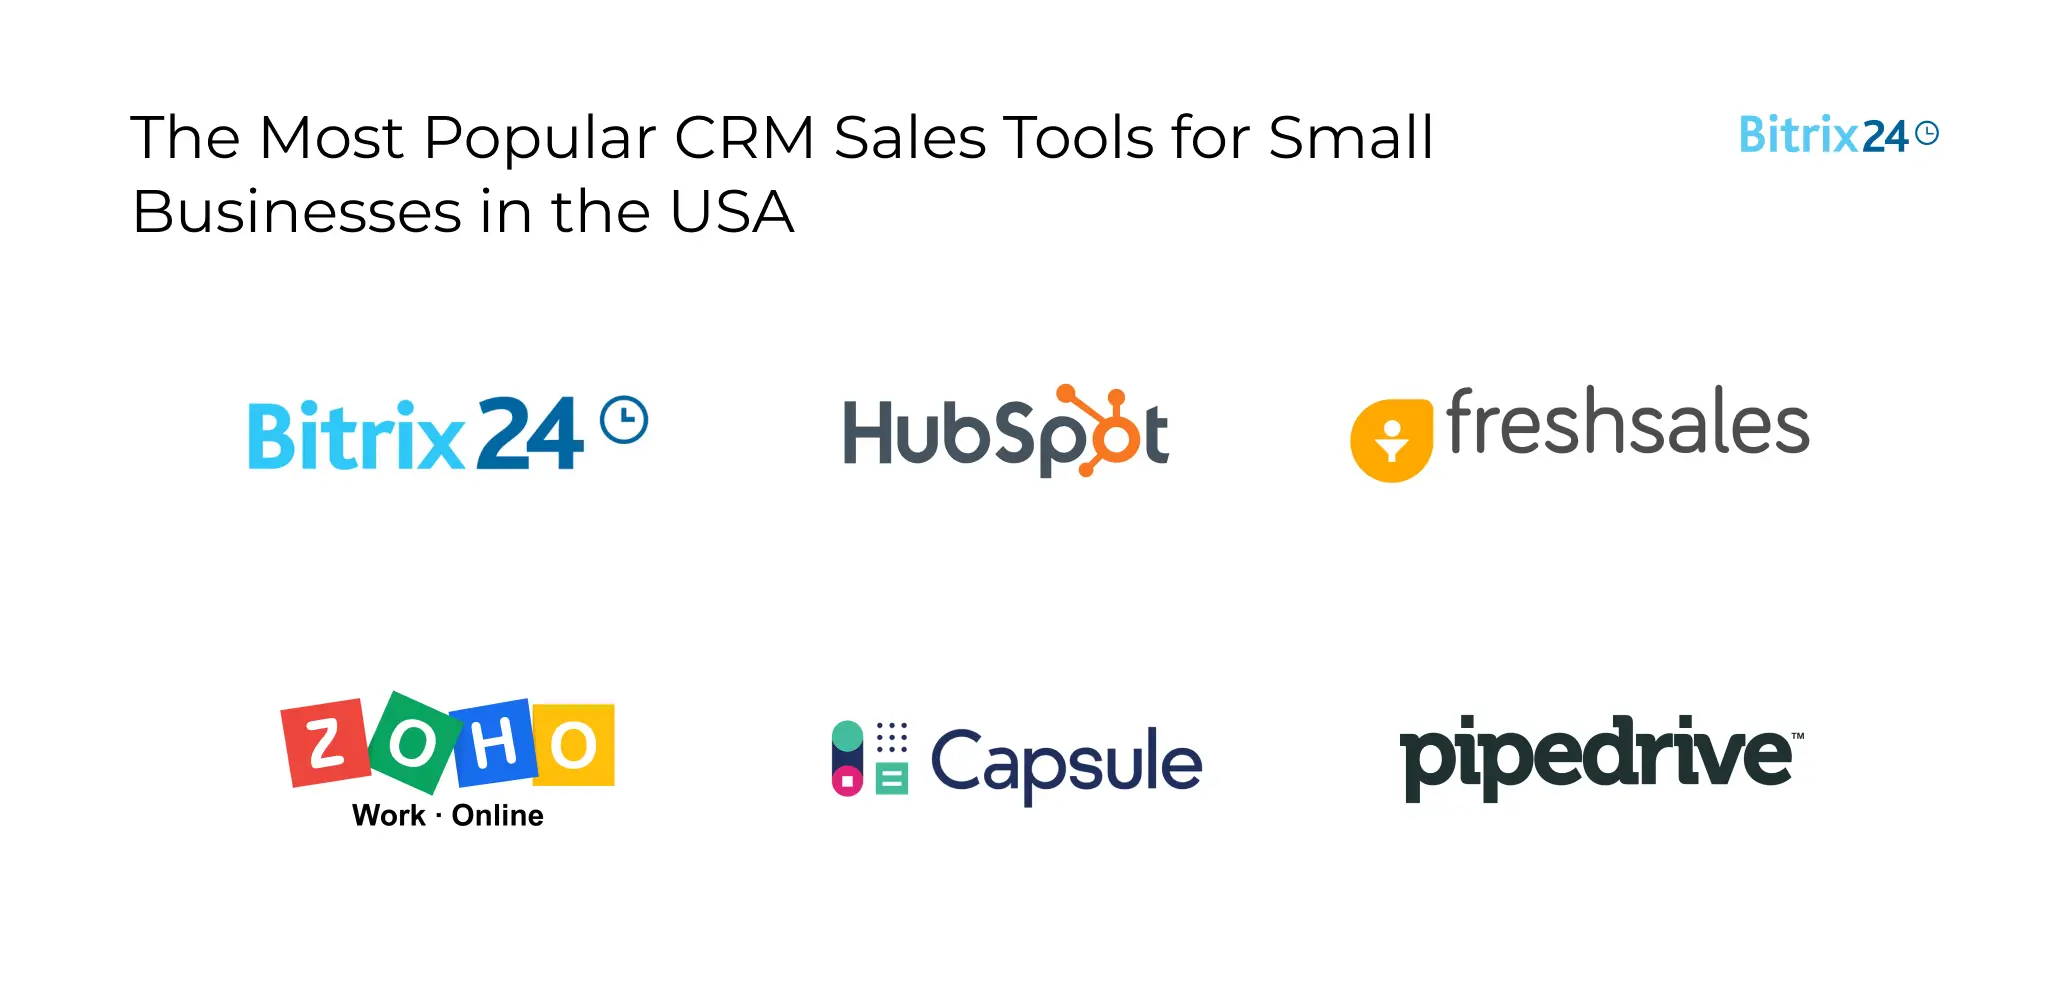 The most popular CRM sales tools for small businesses in the USA